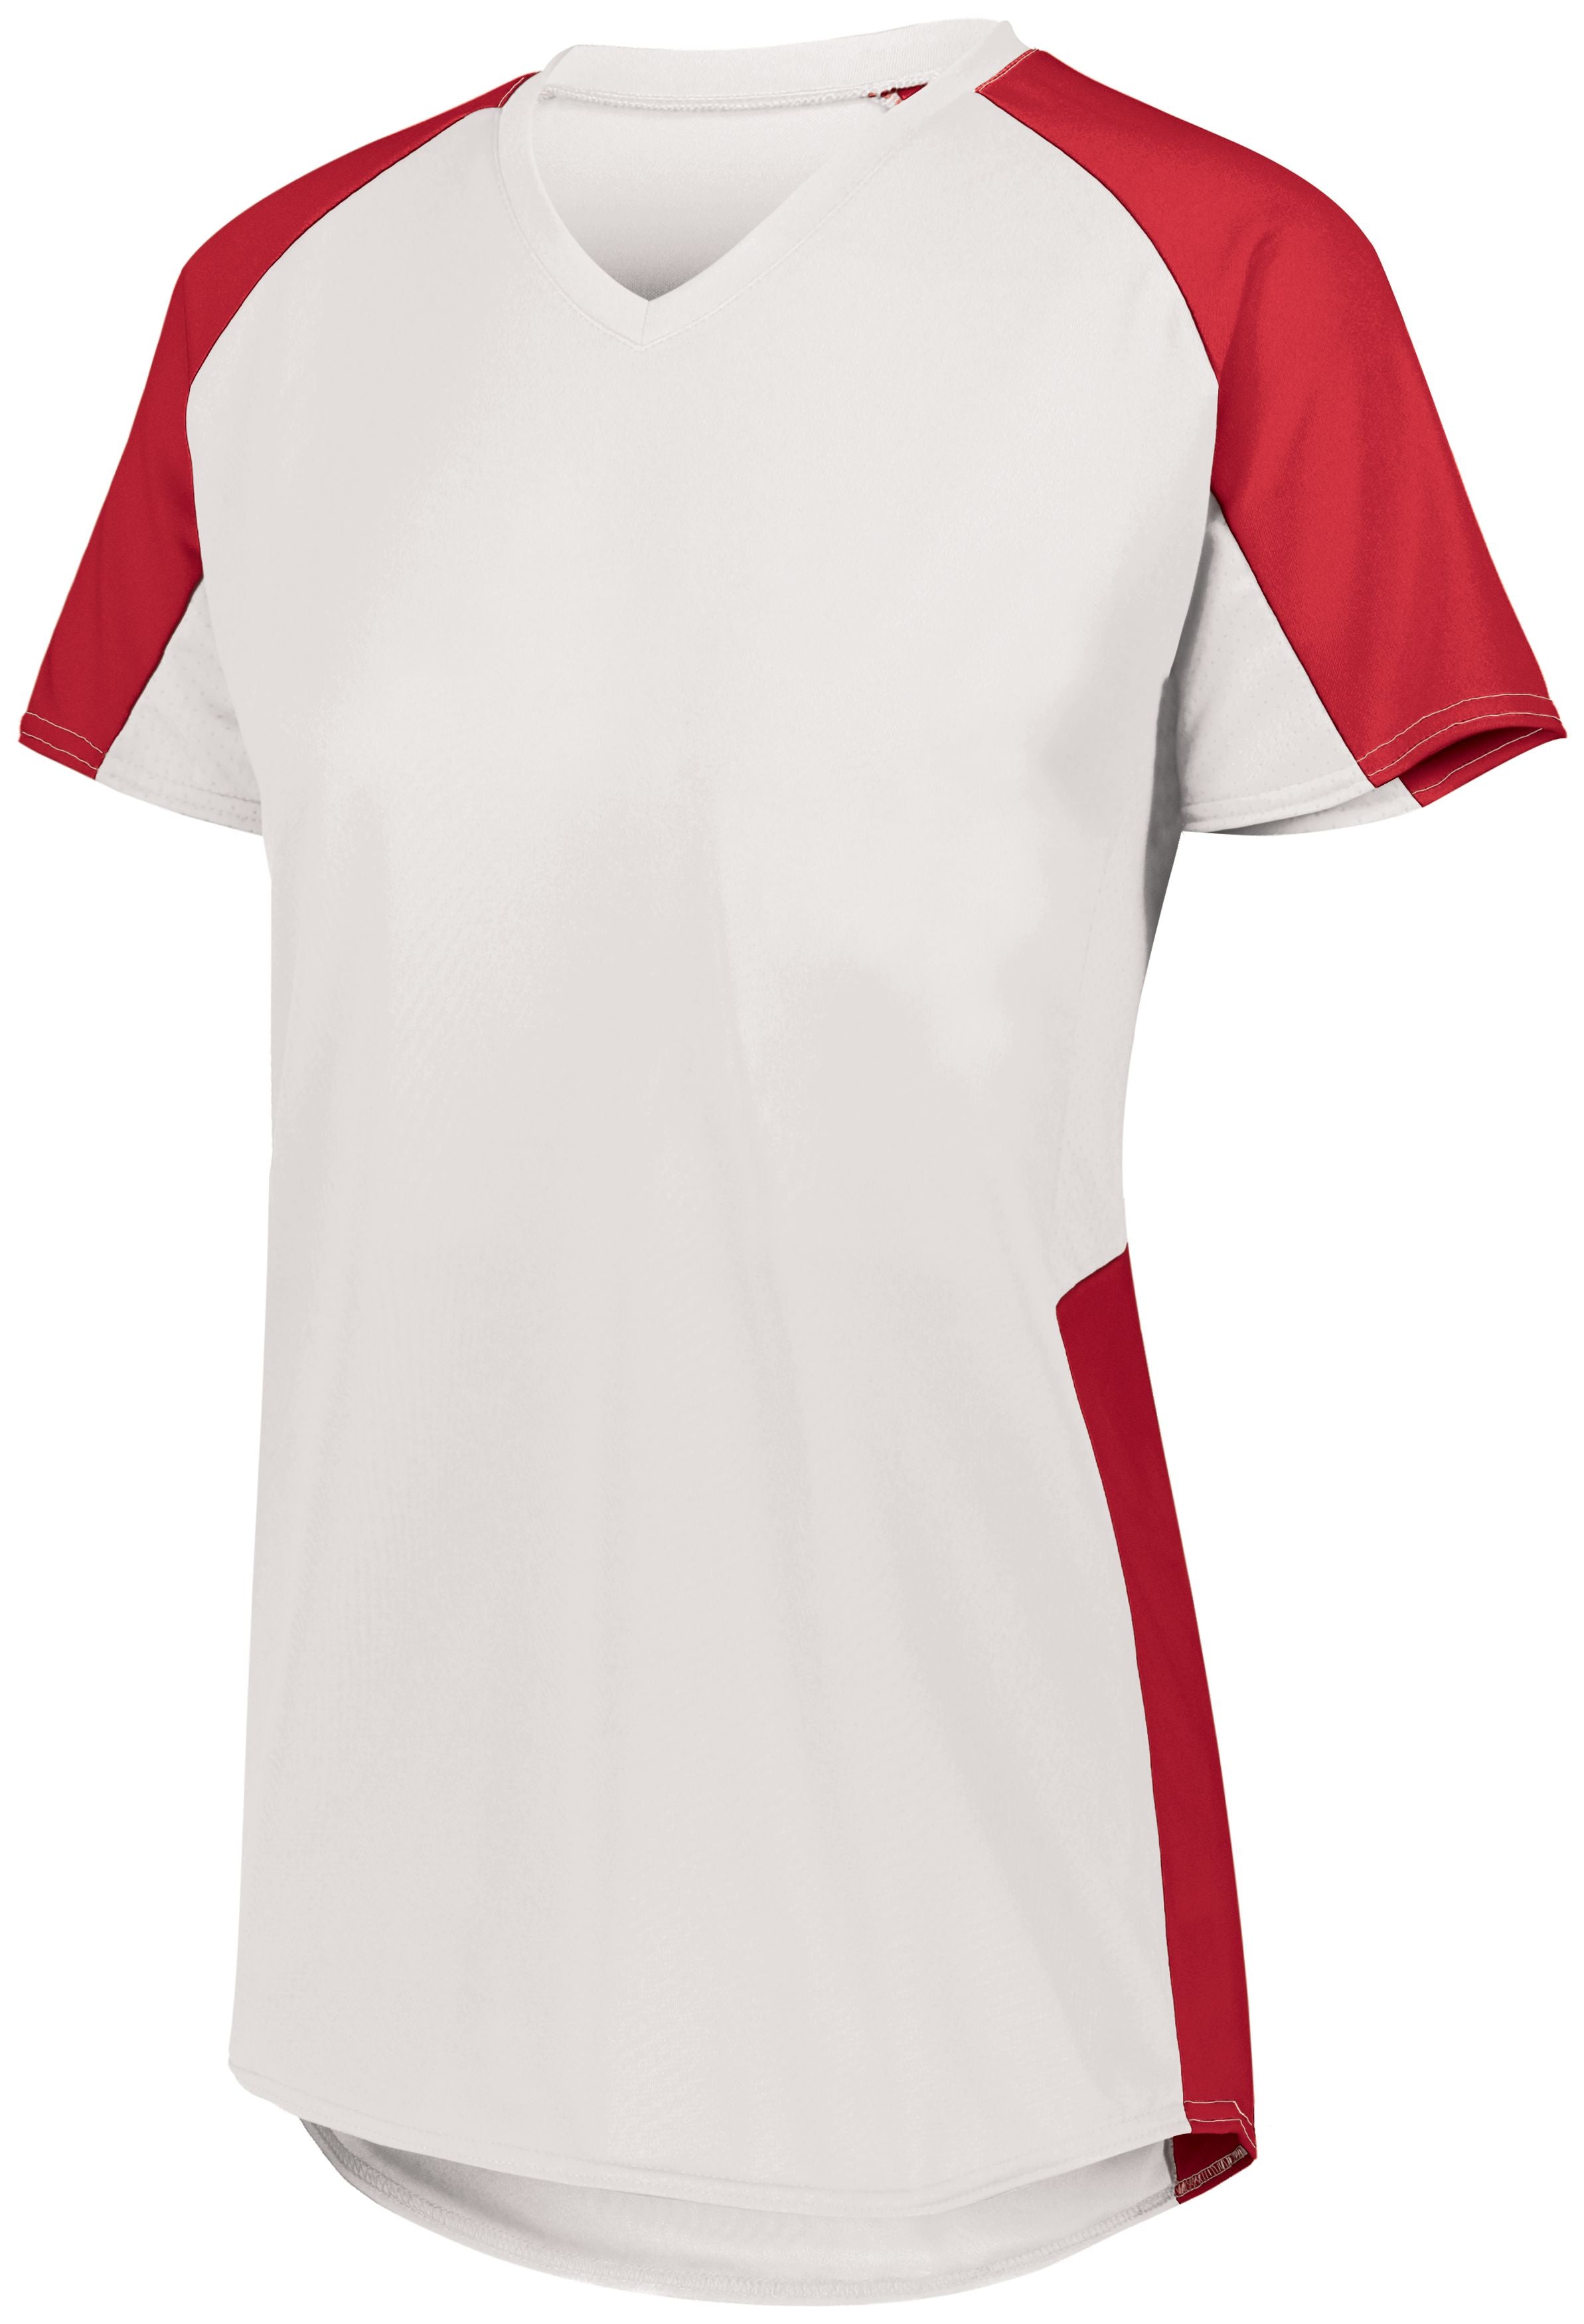 Augusta Sportswear Ladies Cutter Jersey in White/Red  -Part of the Ladies, Ladies-Jersey, Augusta-Products, Softball, Shirts product lines at KanaleyCreations.com